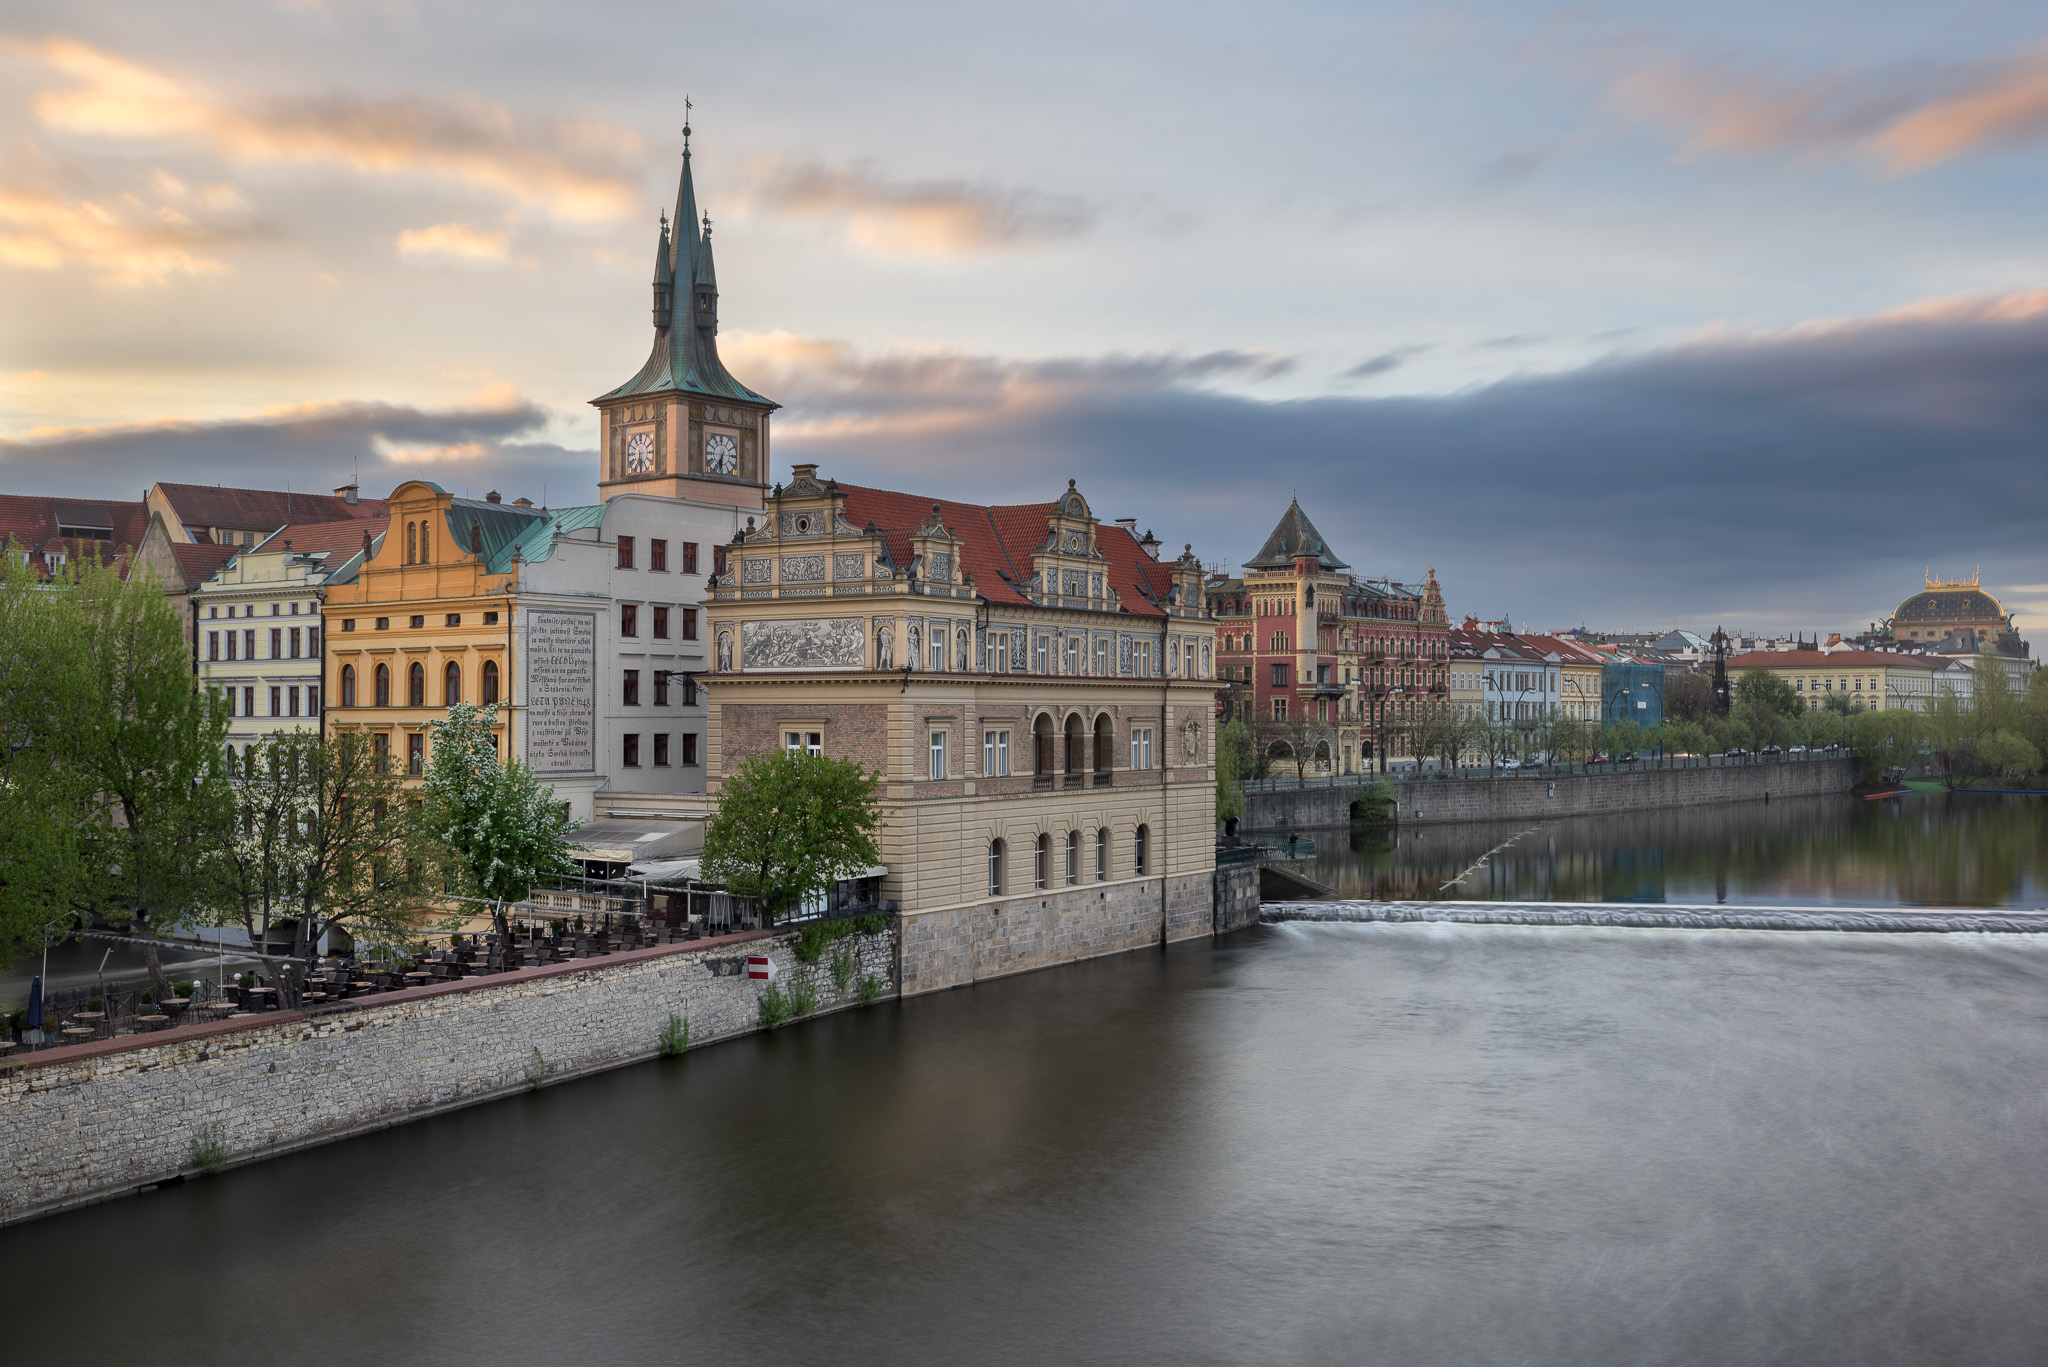 Vltava-River-Smetana-Museum-in-the-Former-Waterworks-and-Old-Water-Tower-at-Sunrise-Prague-Czech-Republic.jpg